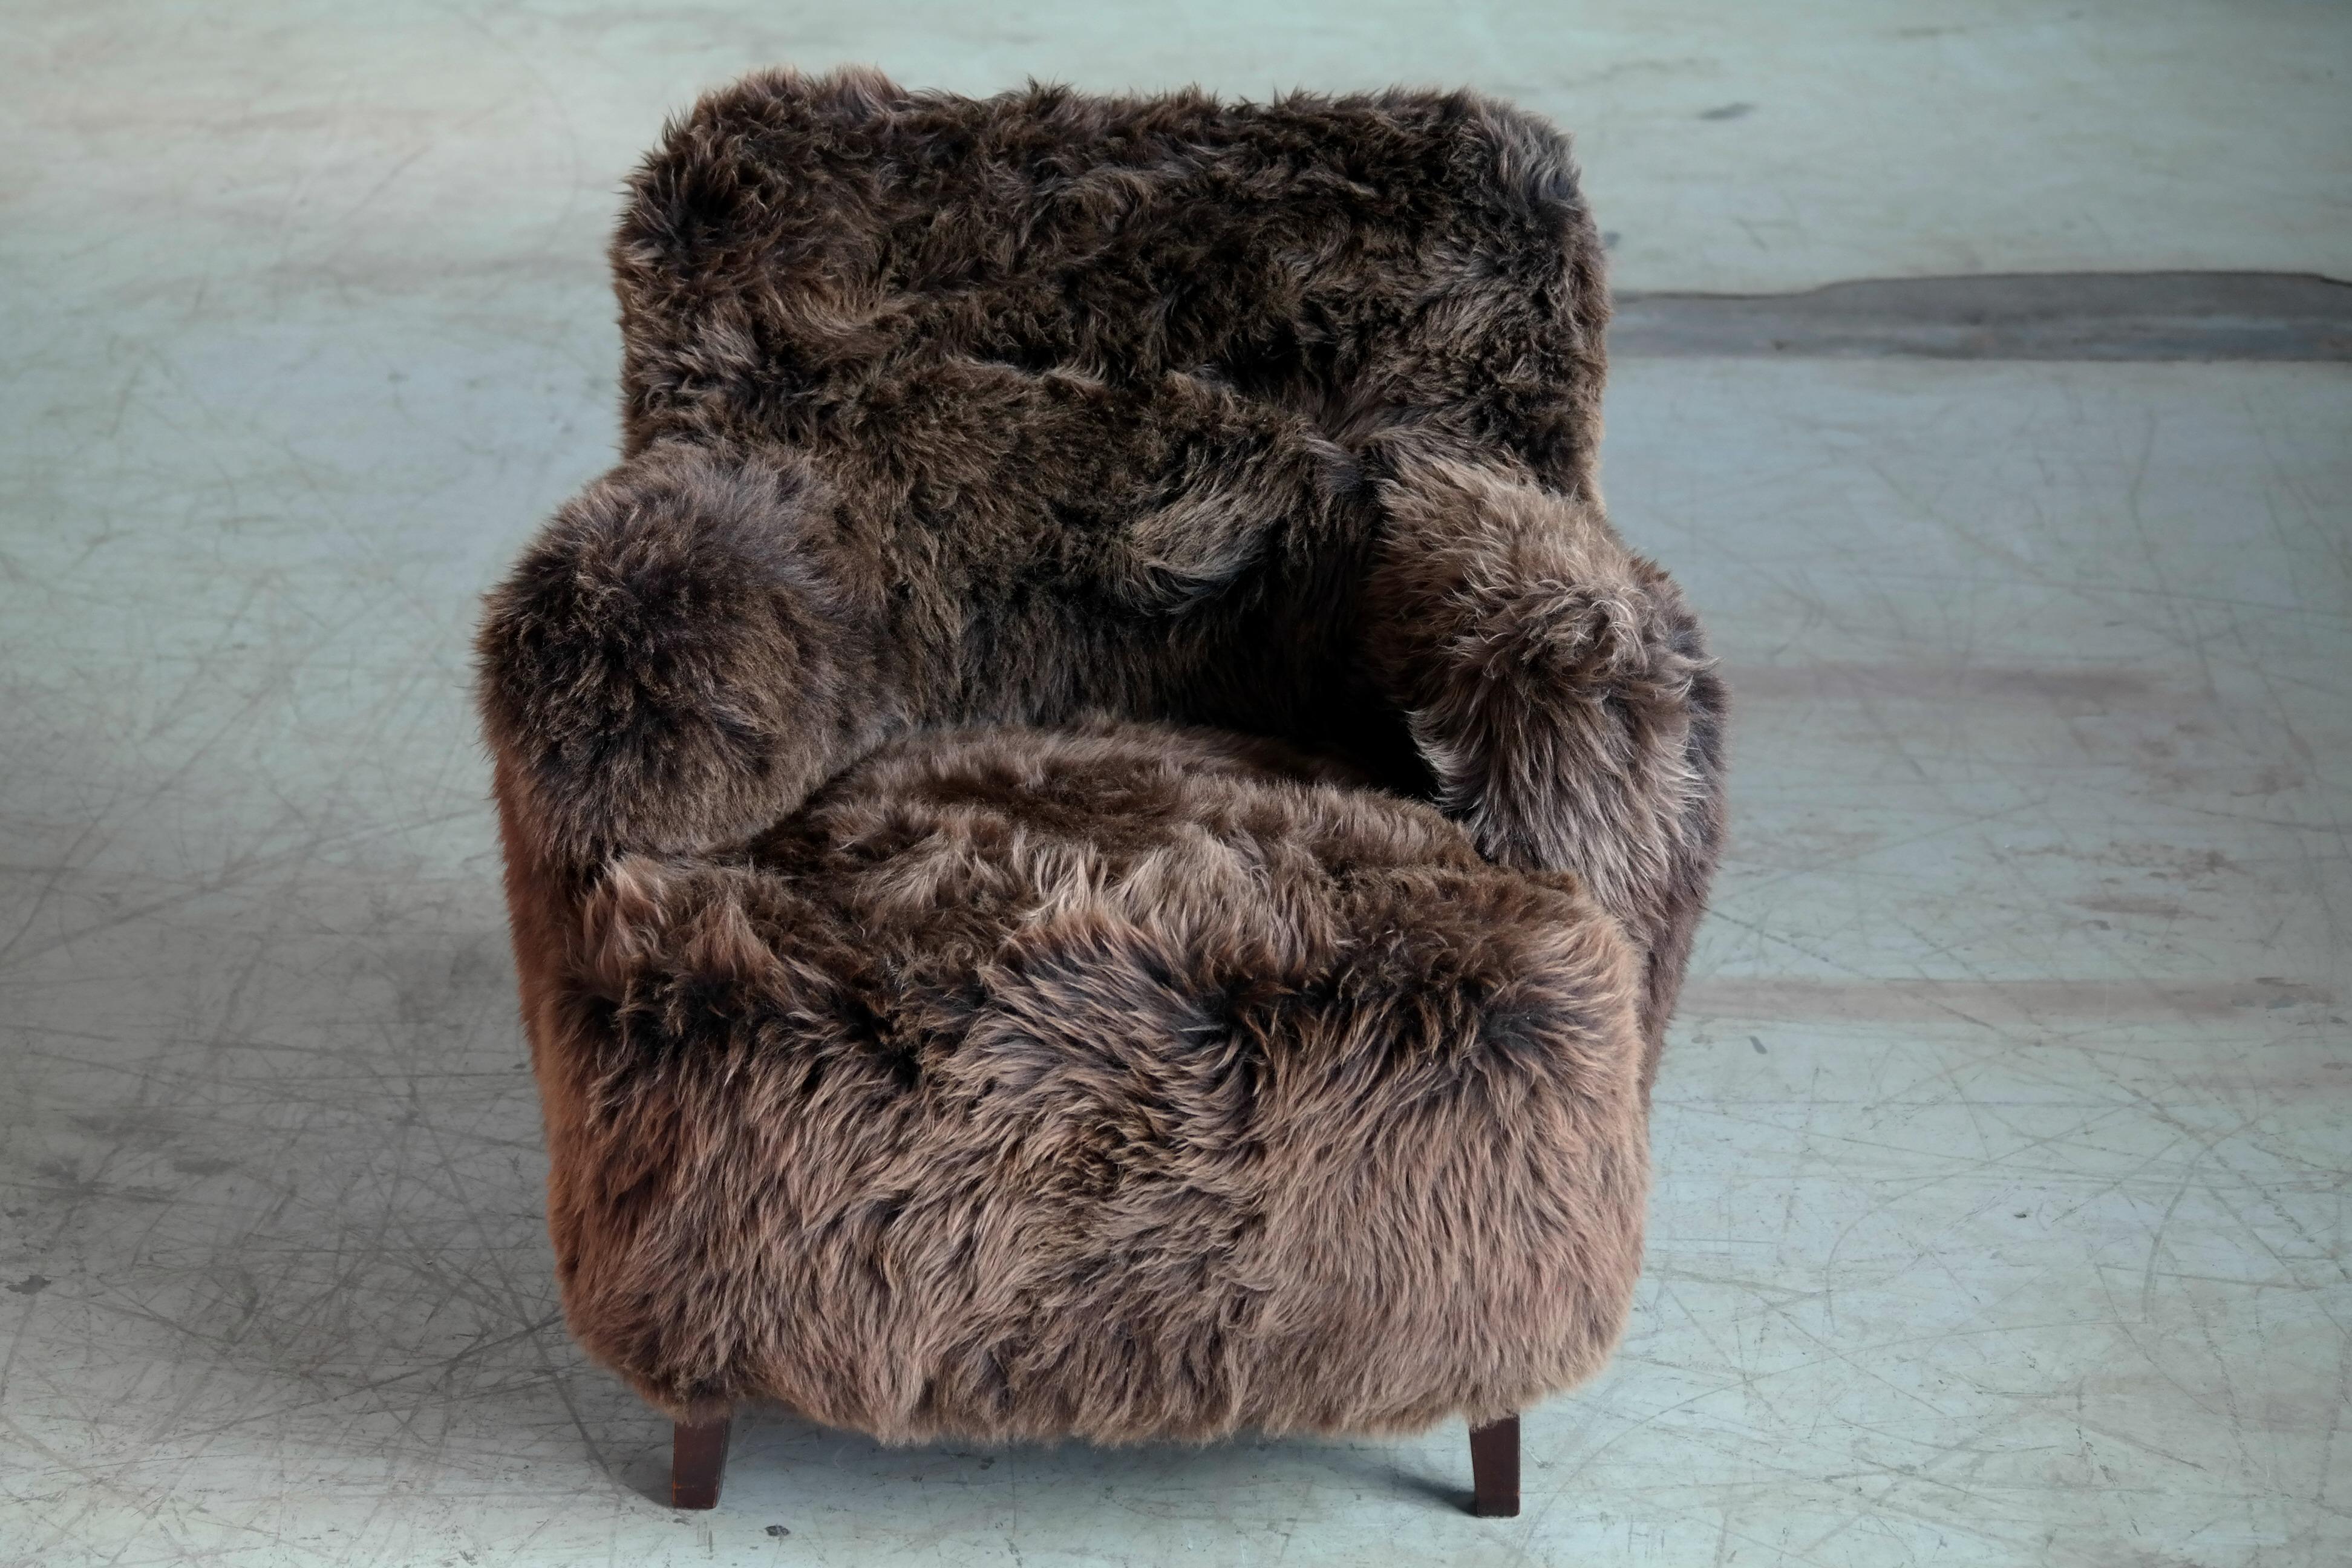 Fabulous Fritz Hansen Style Danish 1950s medium size lounge chair covered in super soft Icelandic natural sheepskin. Super comfortable and so warm and plush - perfect for the Lady of the Manor's bedroom or dressing room. Newly upholstered excellent